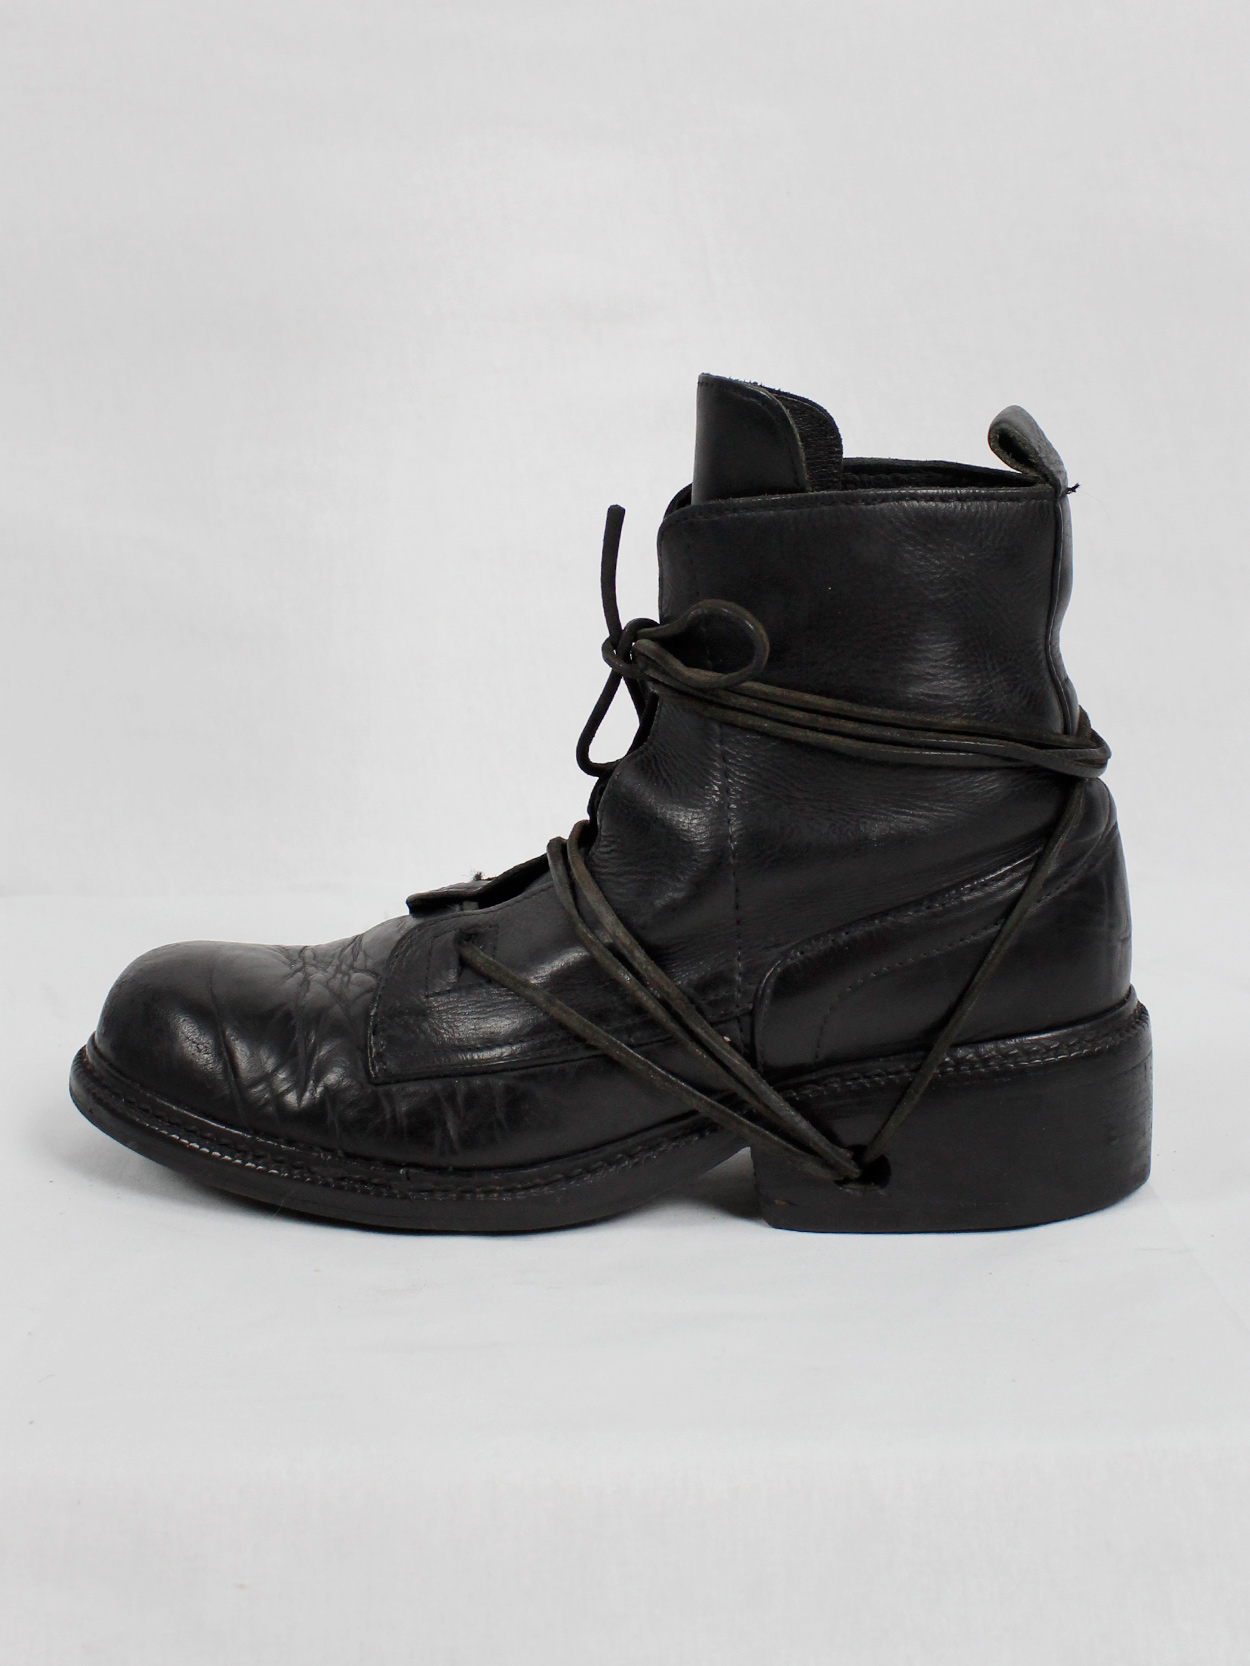 Dirk Bikkembergs black tall boots with laces through the soles (45 